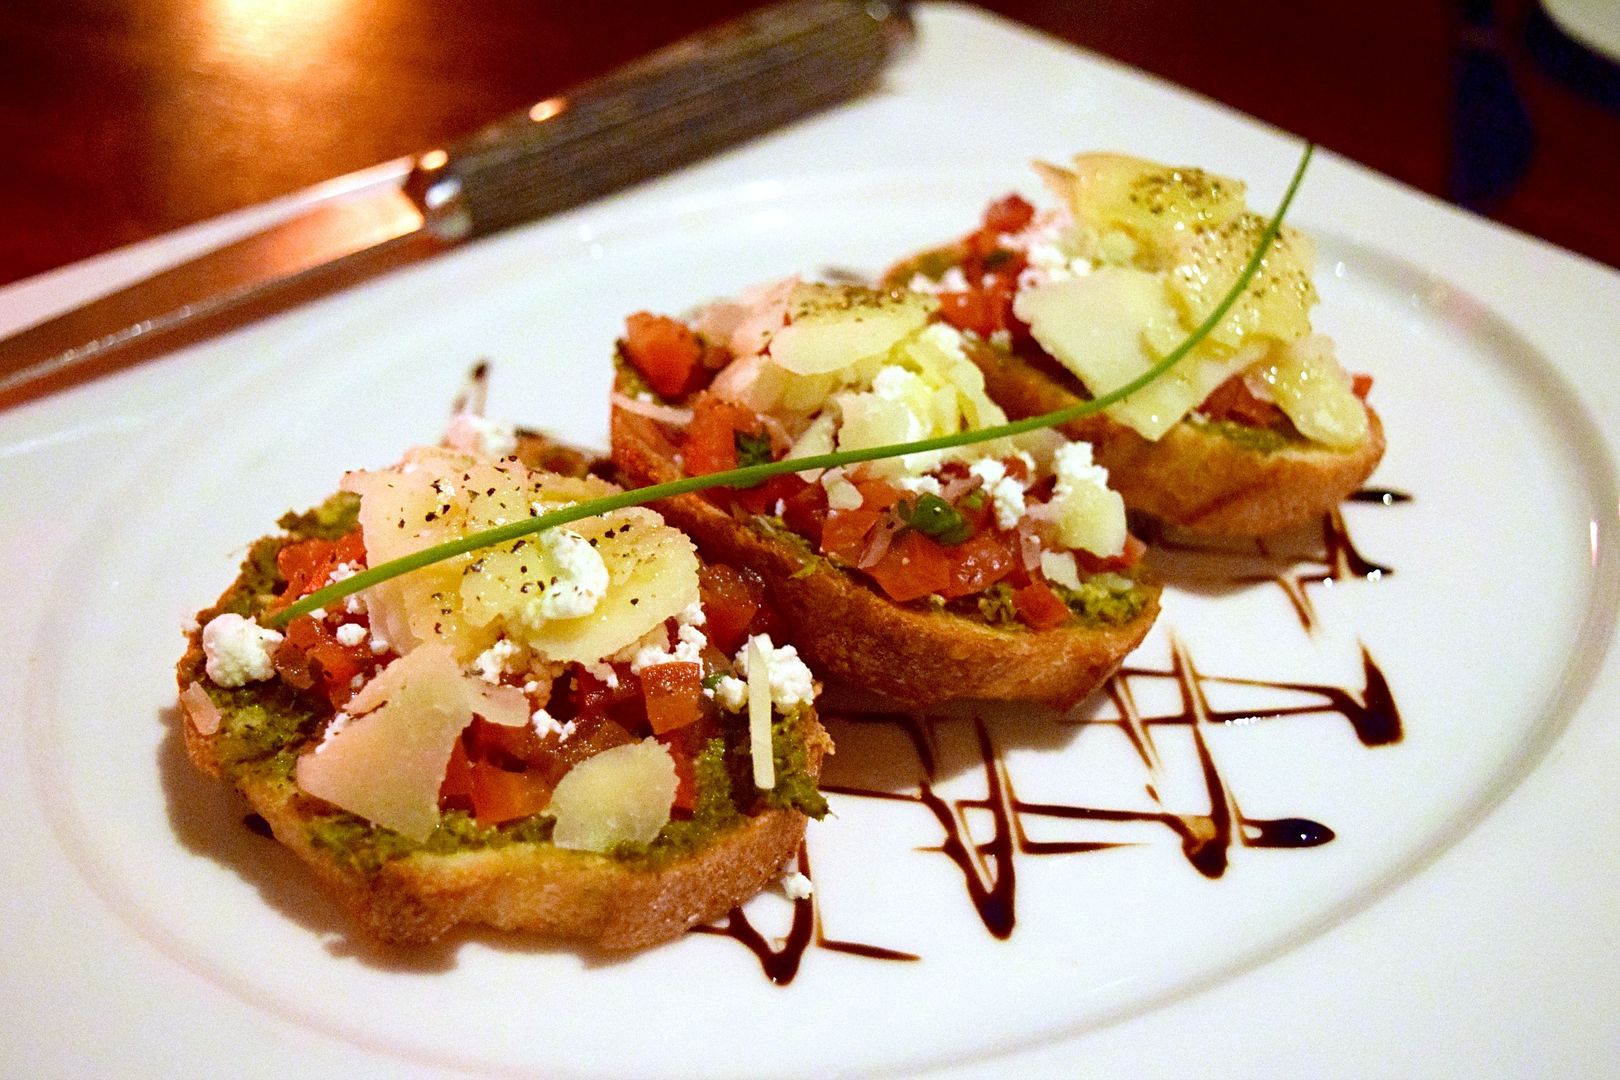 Bruschetta at The Meat Co